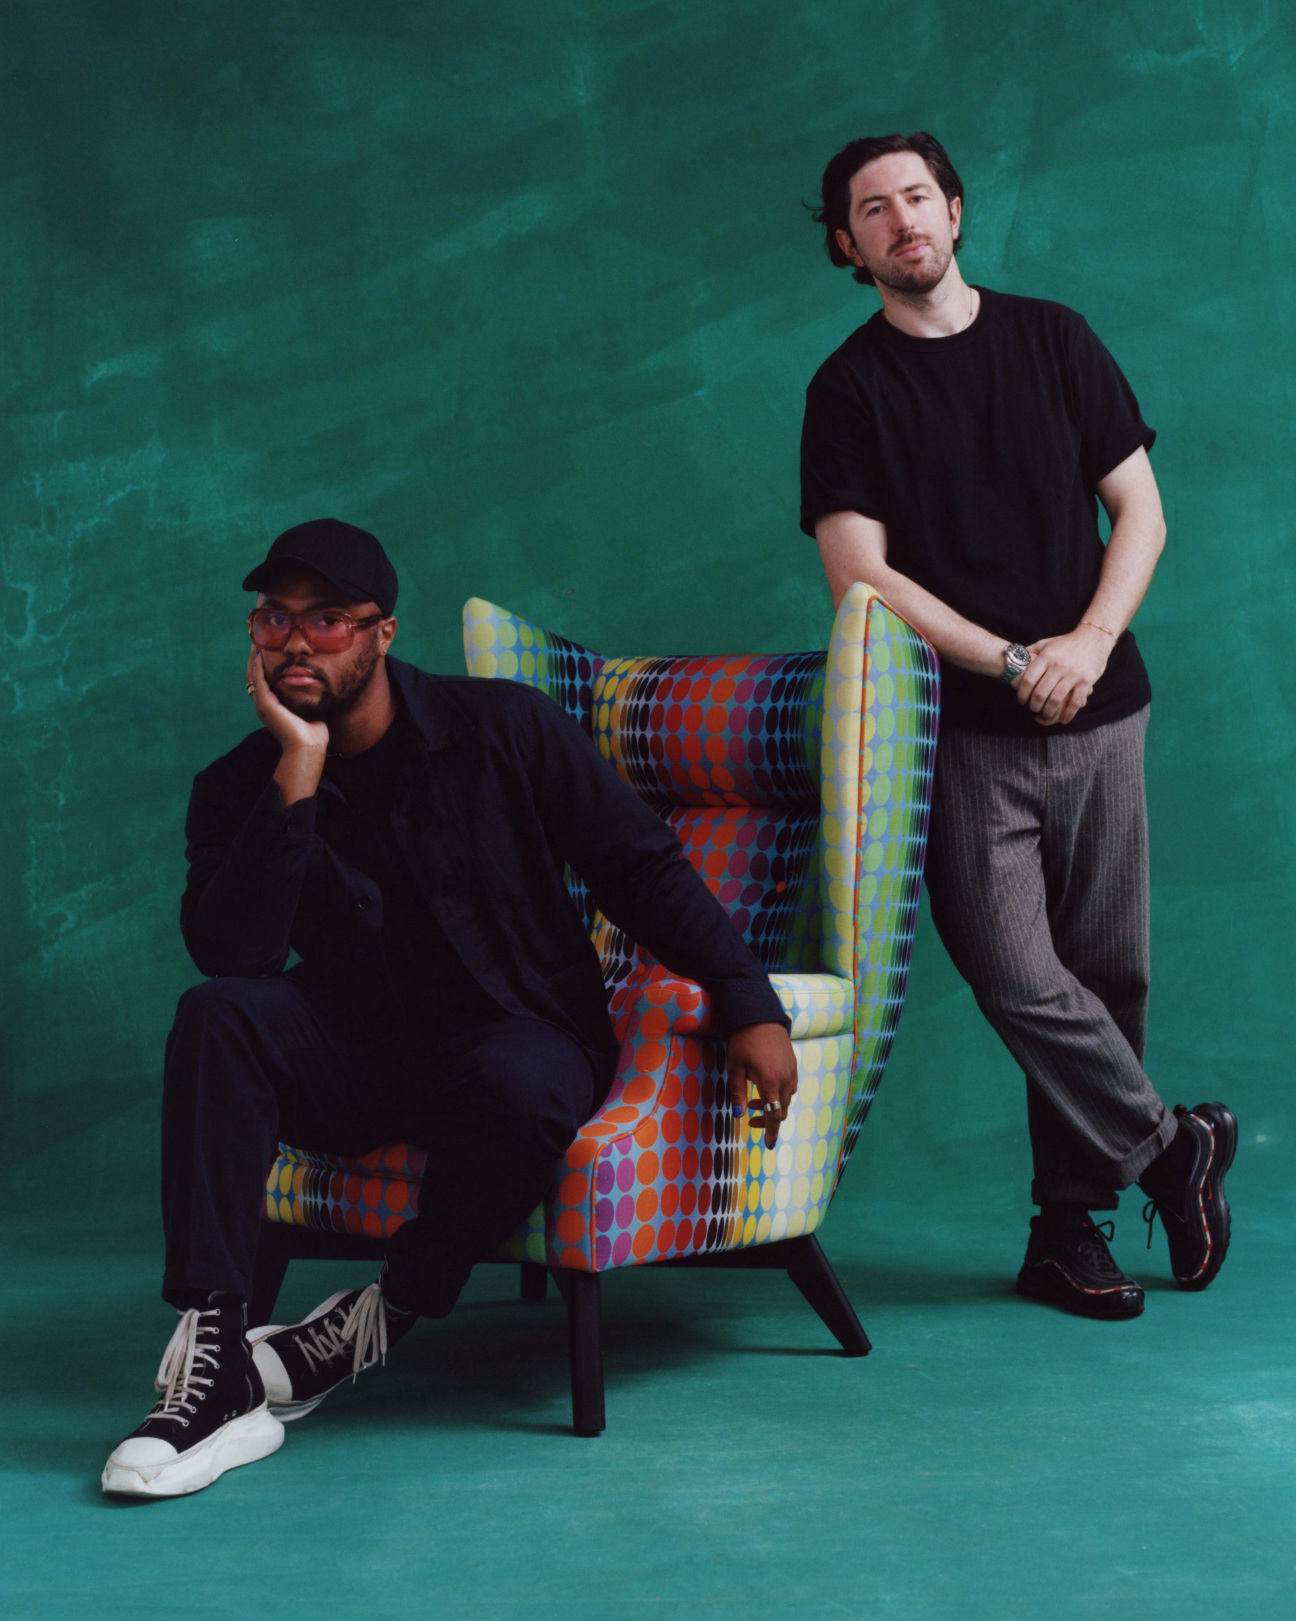 Christopher John Rogers and Ciarán McGuigan photographed with multicolored circular patterned chair, against a dark green backdrop.